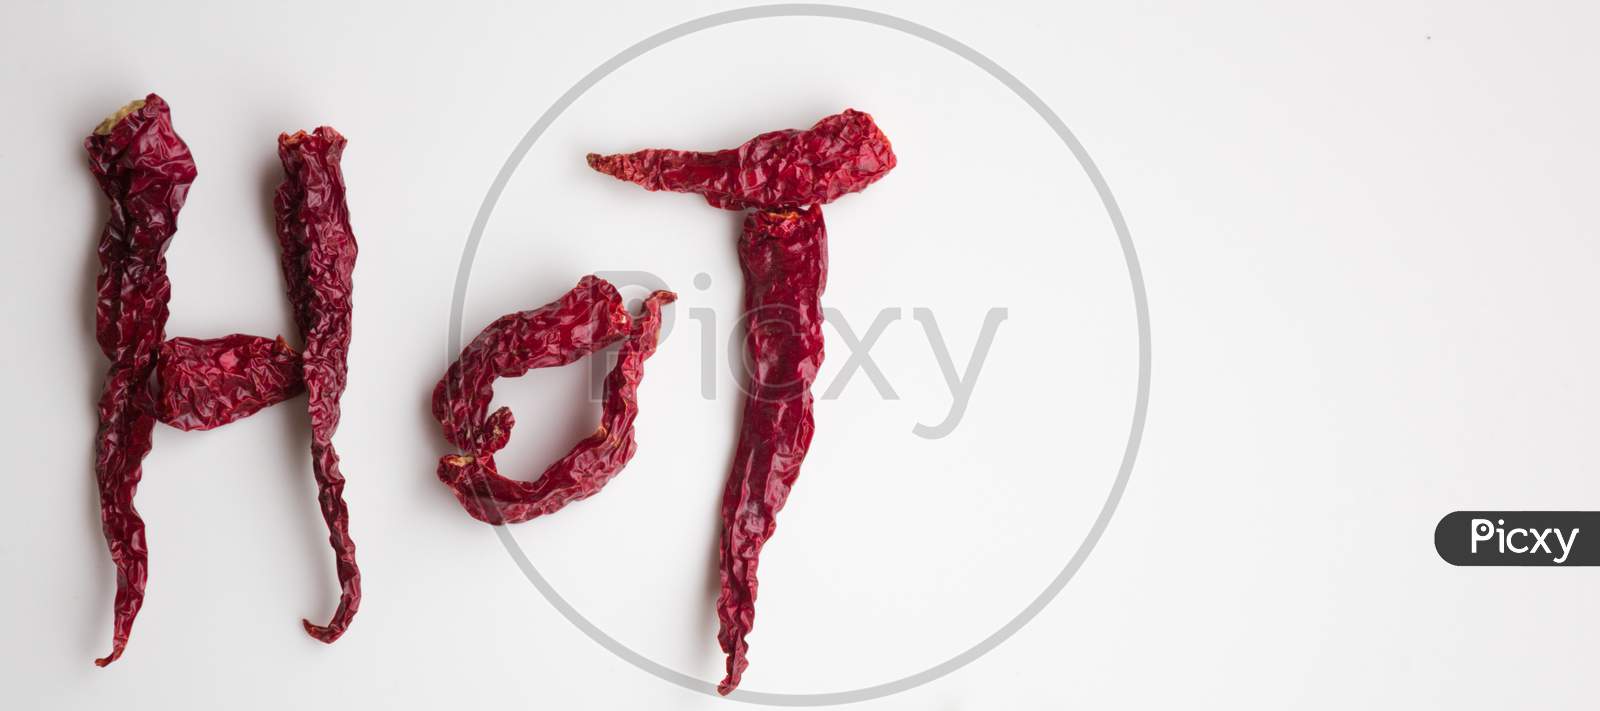 Indian Red Chilies in a pattern in food photography.